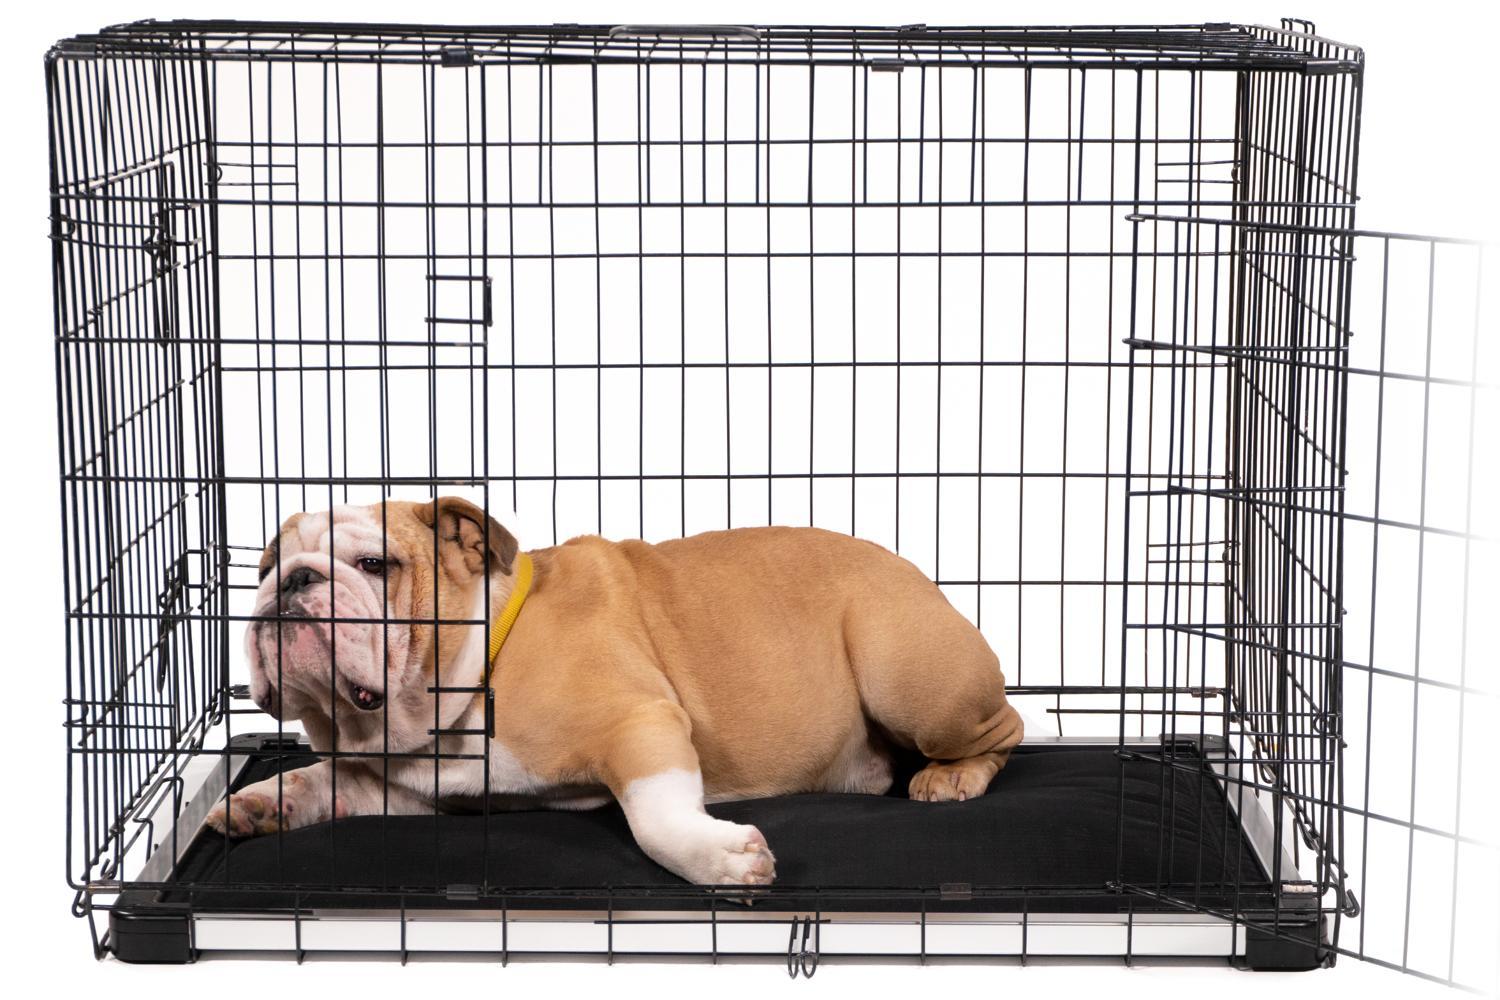 how do i stop my dog from chewing blankets in his crate